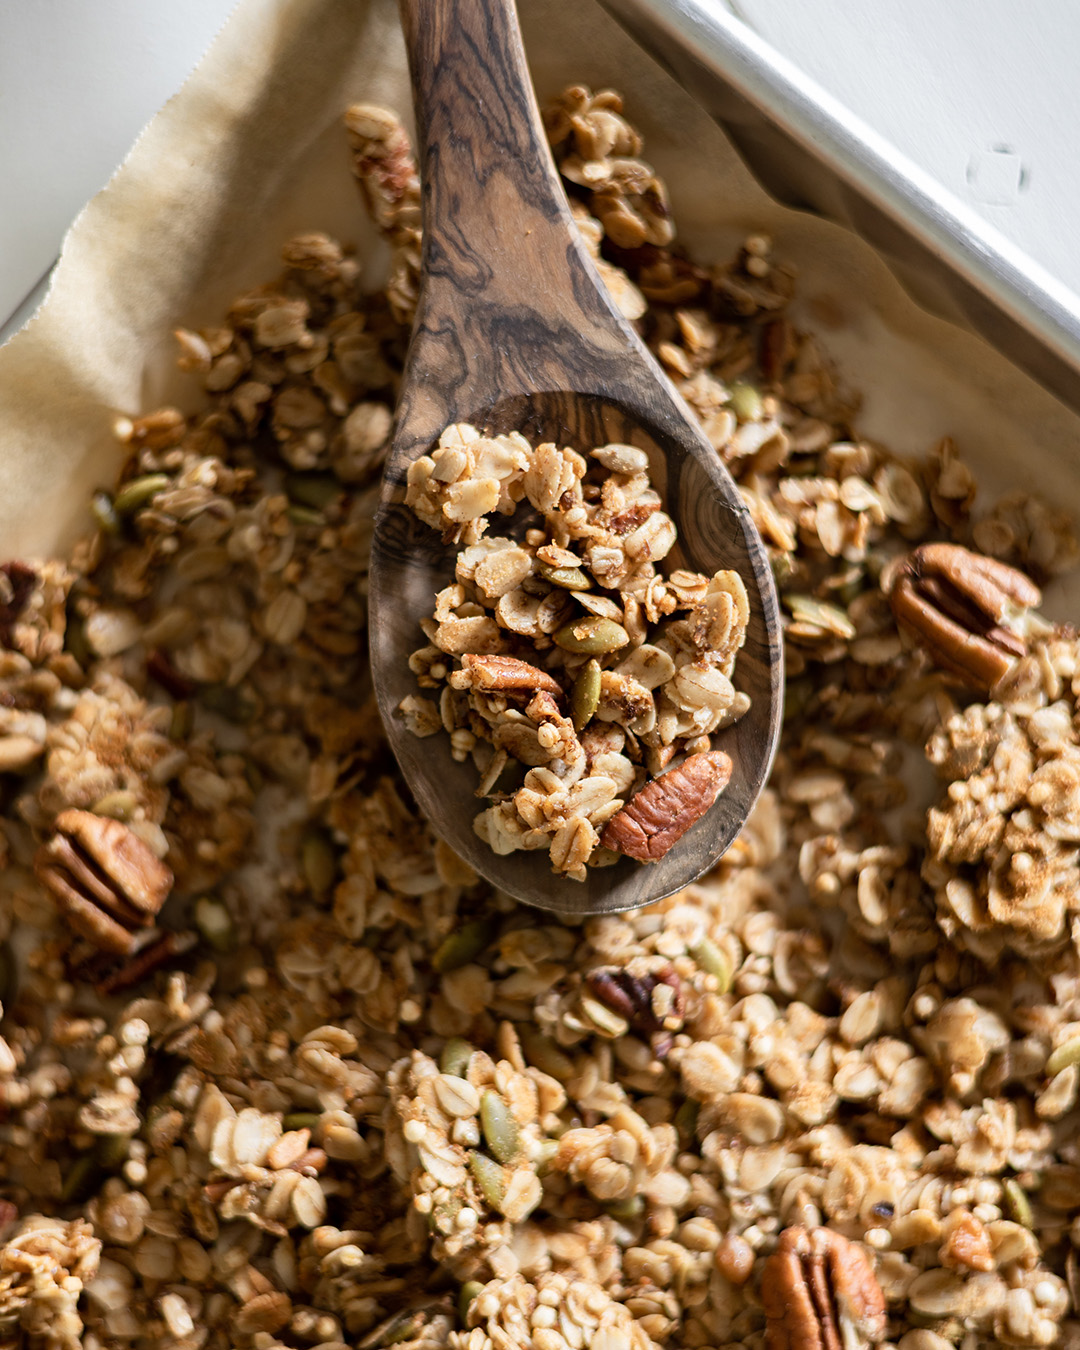 homemade maple pecan granola is great to keep on hand for easy breakfasts, delicious snacking, or fancy yogurt parfaits if you're entertaining for Sunday brunch. It can be made ahead and stored in the freezer so it's always ready.